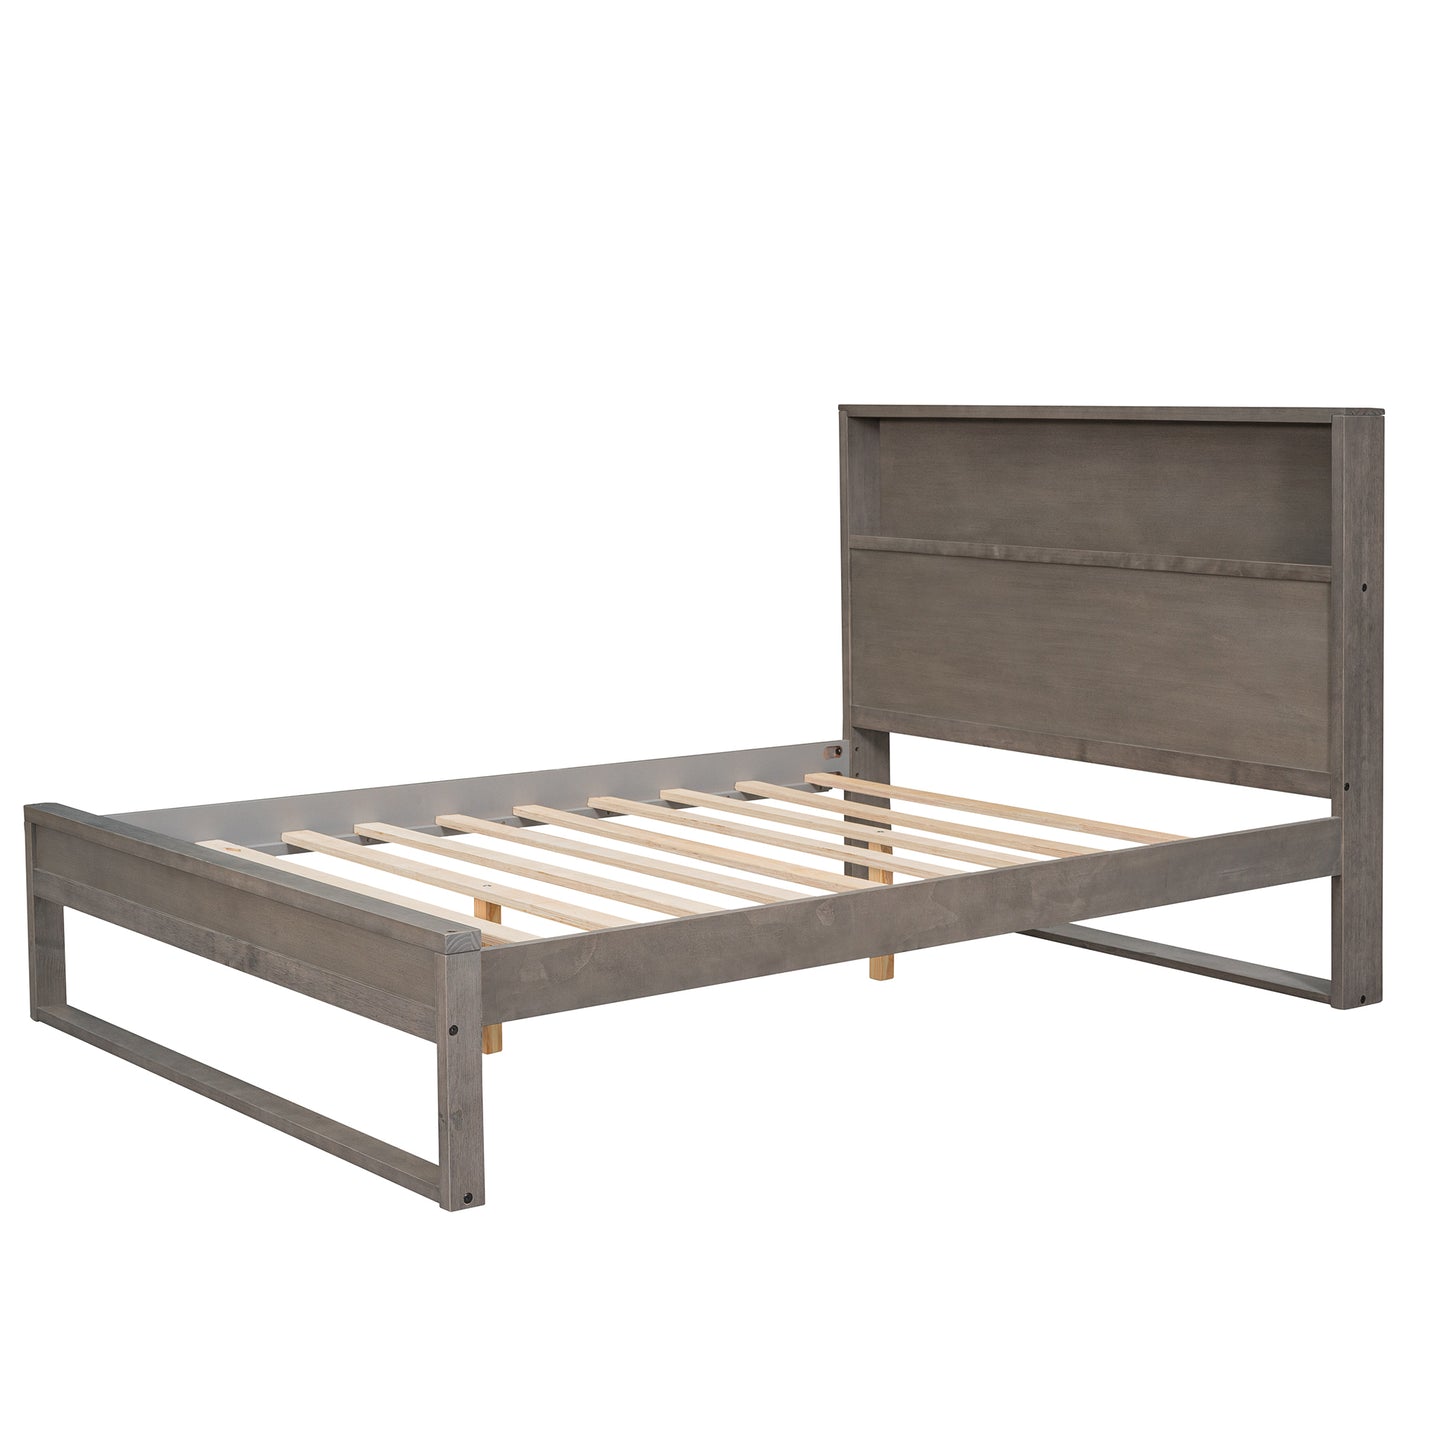 Platform Bed with Storage Headboard,Sockets and USB Ports,Full Size Platform Bed,Antique Gray